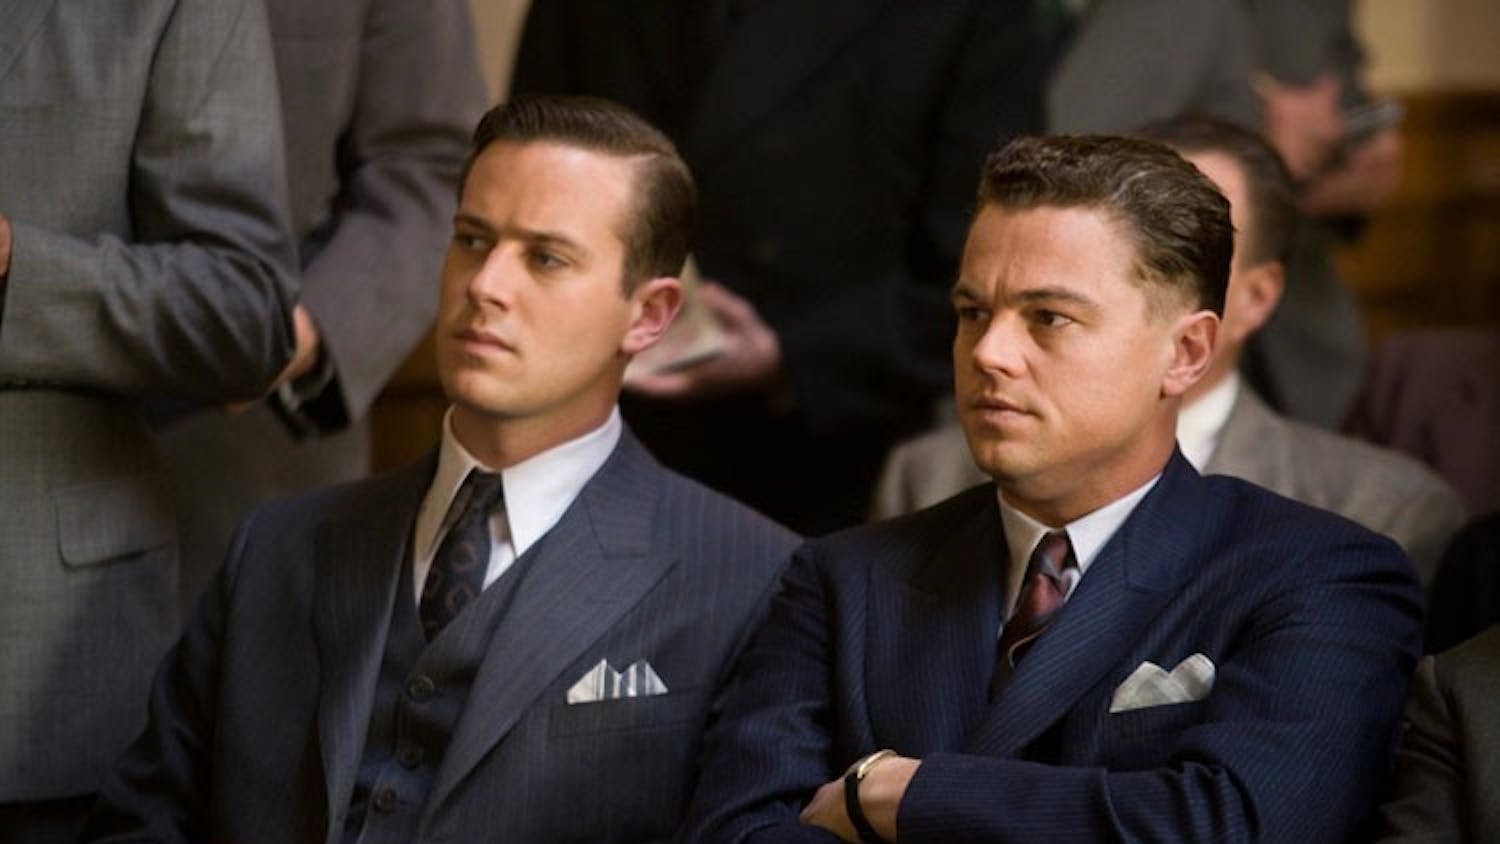 In his latest flick, Leonardo DiCaprio stars as J. Edgar Hoover, the controversial first-ever director of the FBI.